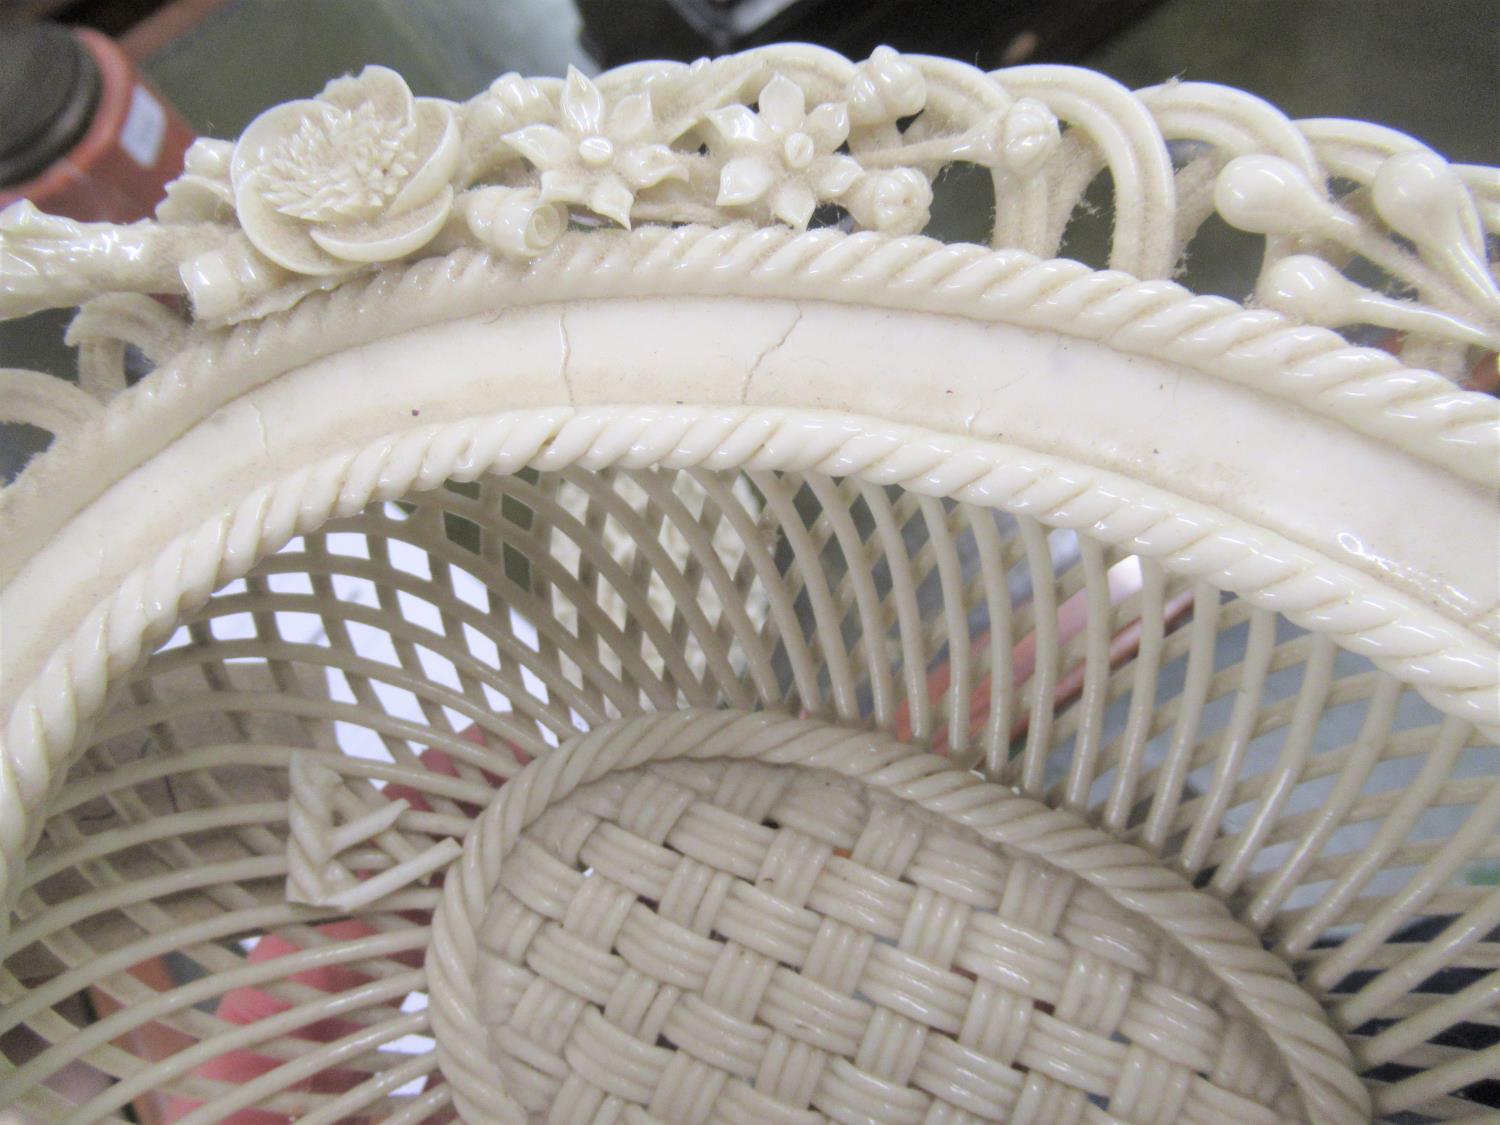 19th Century Belleek floral encrusted lattice work basket with cover (some damages), 8.5ins x 6.5ins - Image 9 of 12